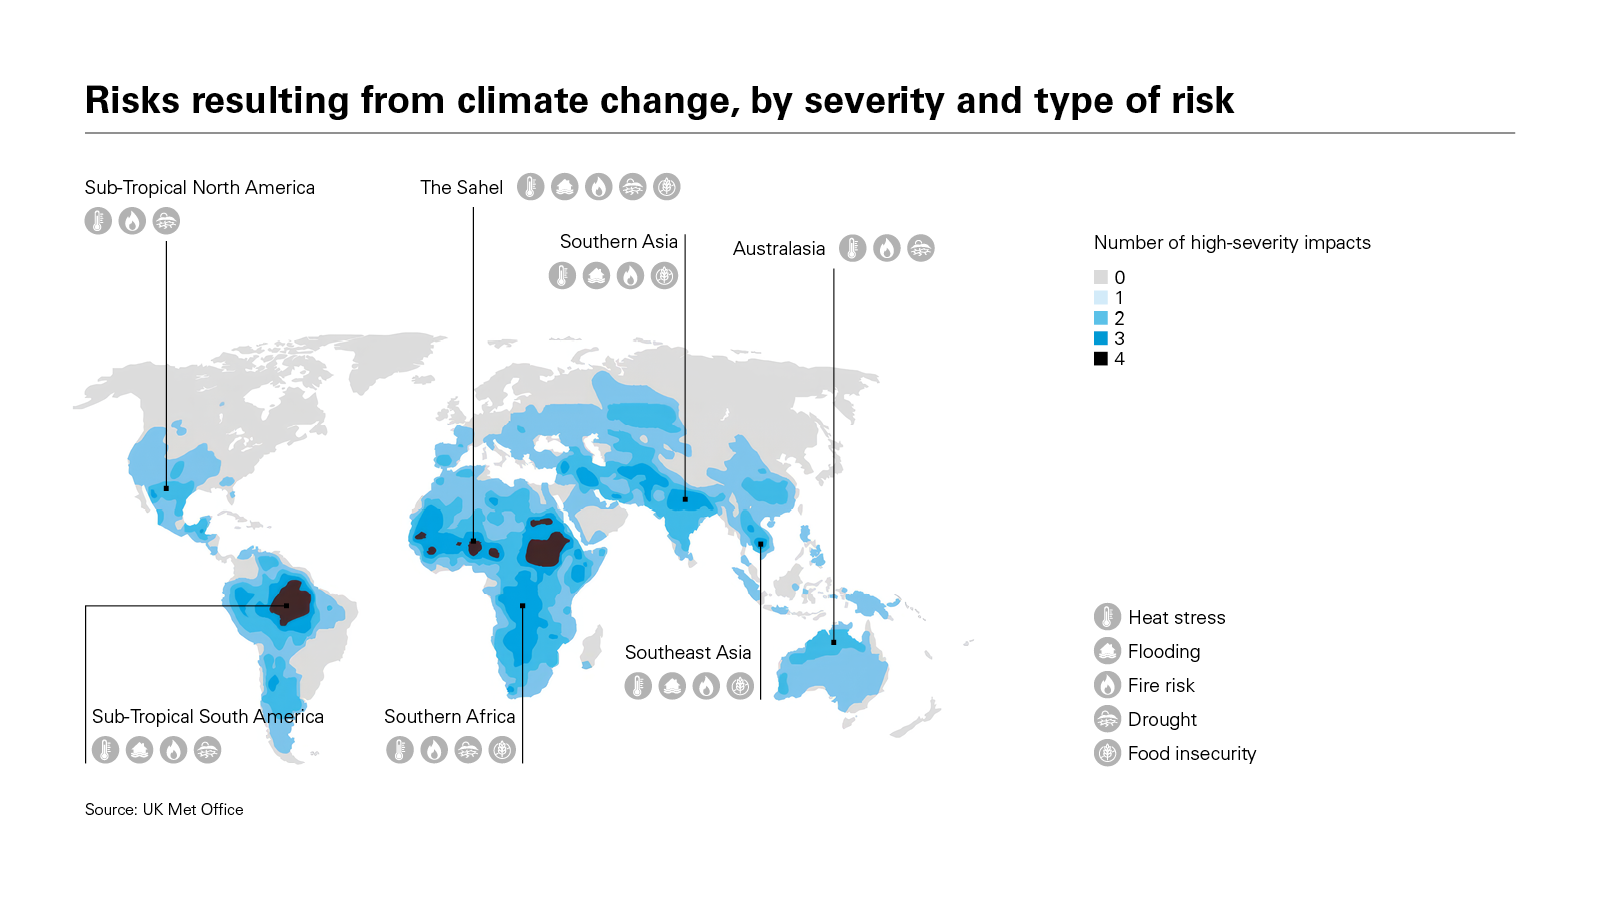 Risks resulting from climate change, by severity and type of risk